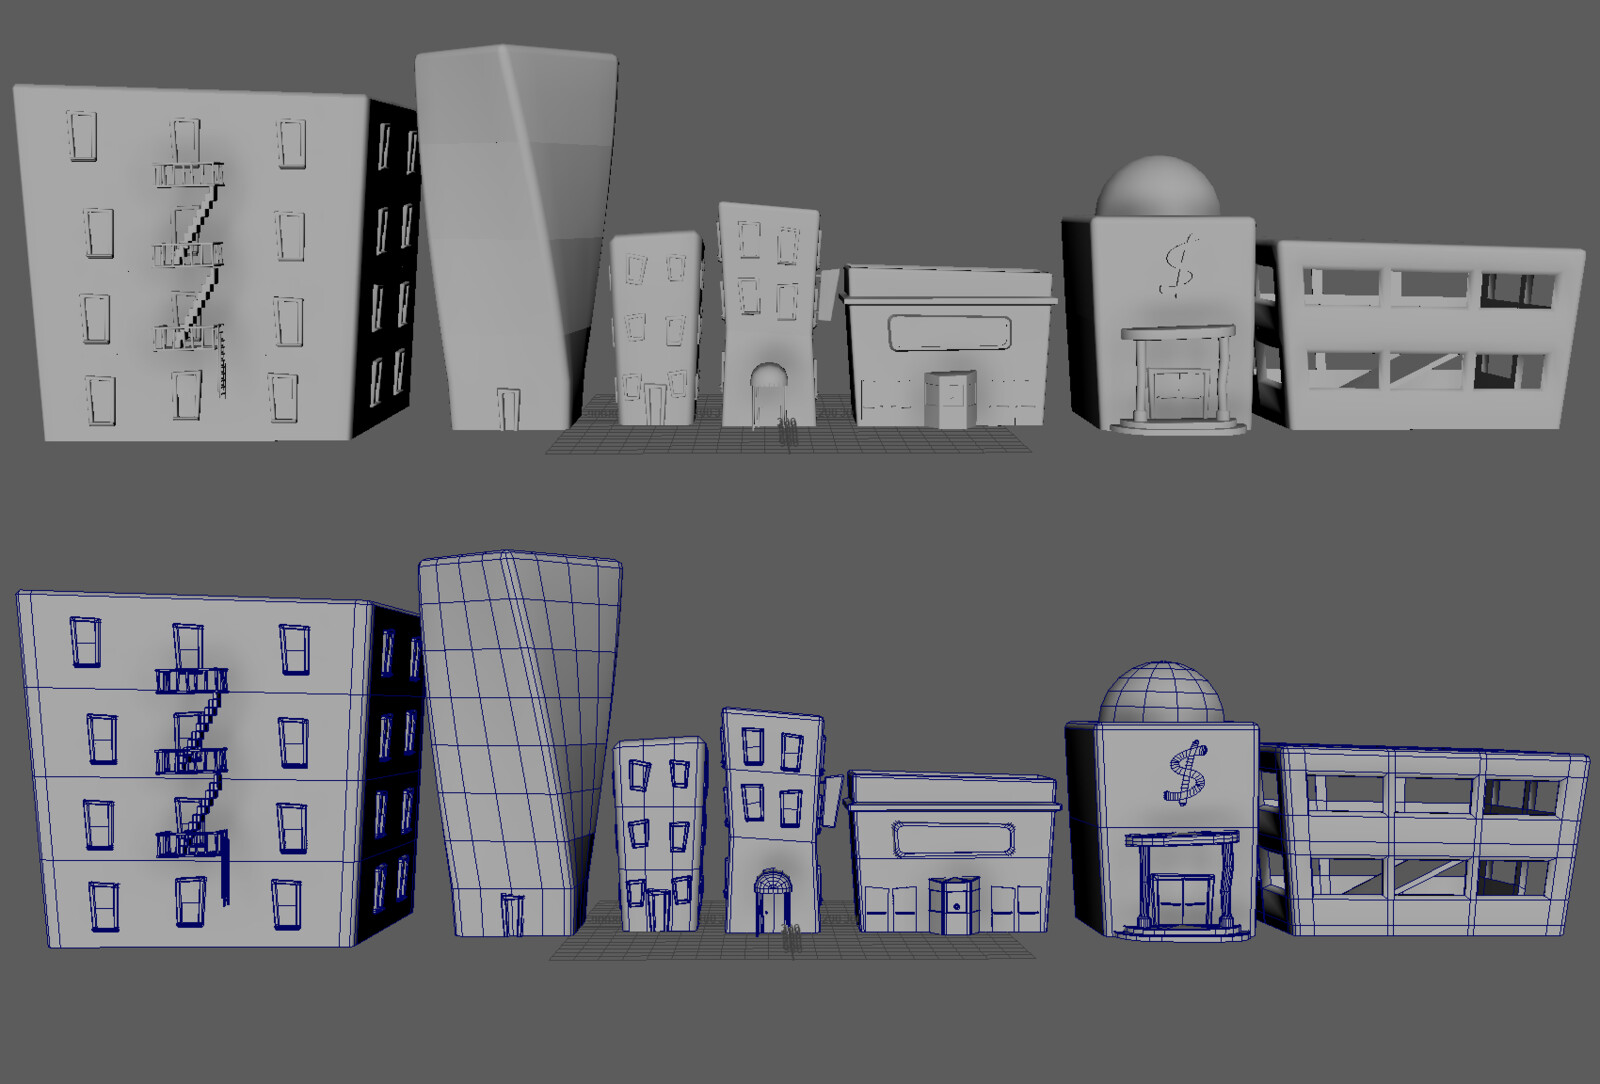 WIP | Destructible Buildings for "Die! This World"